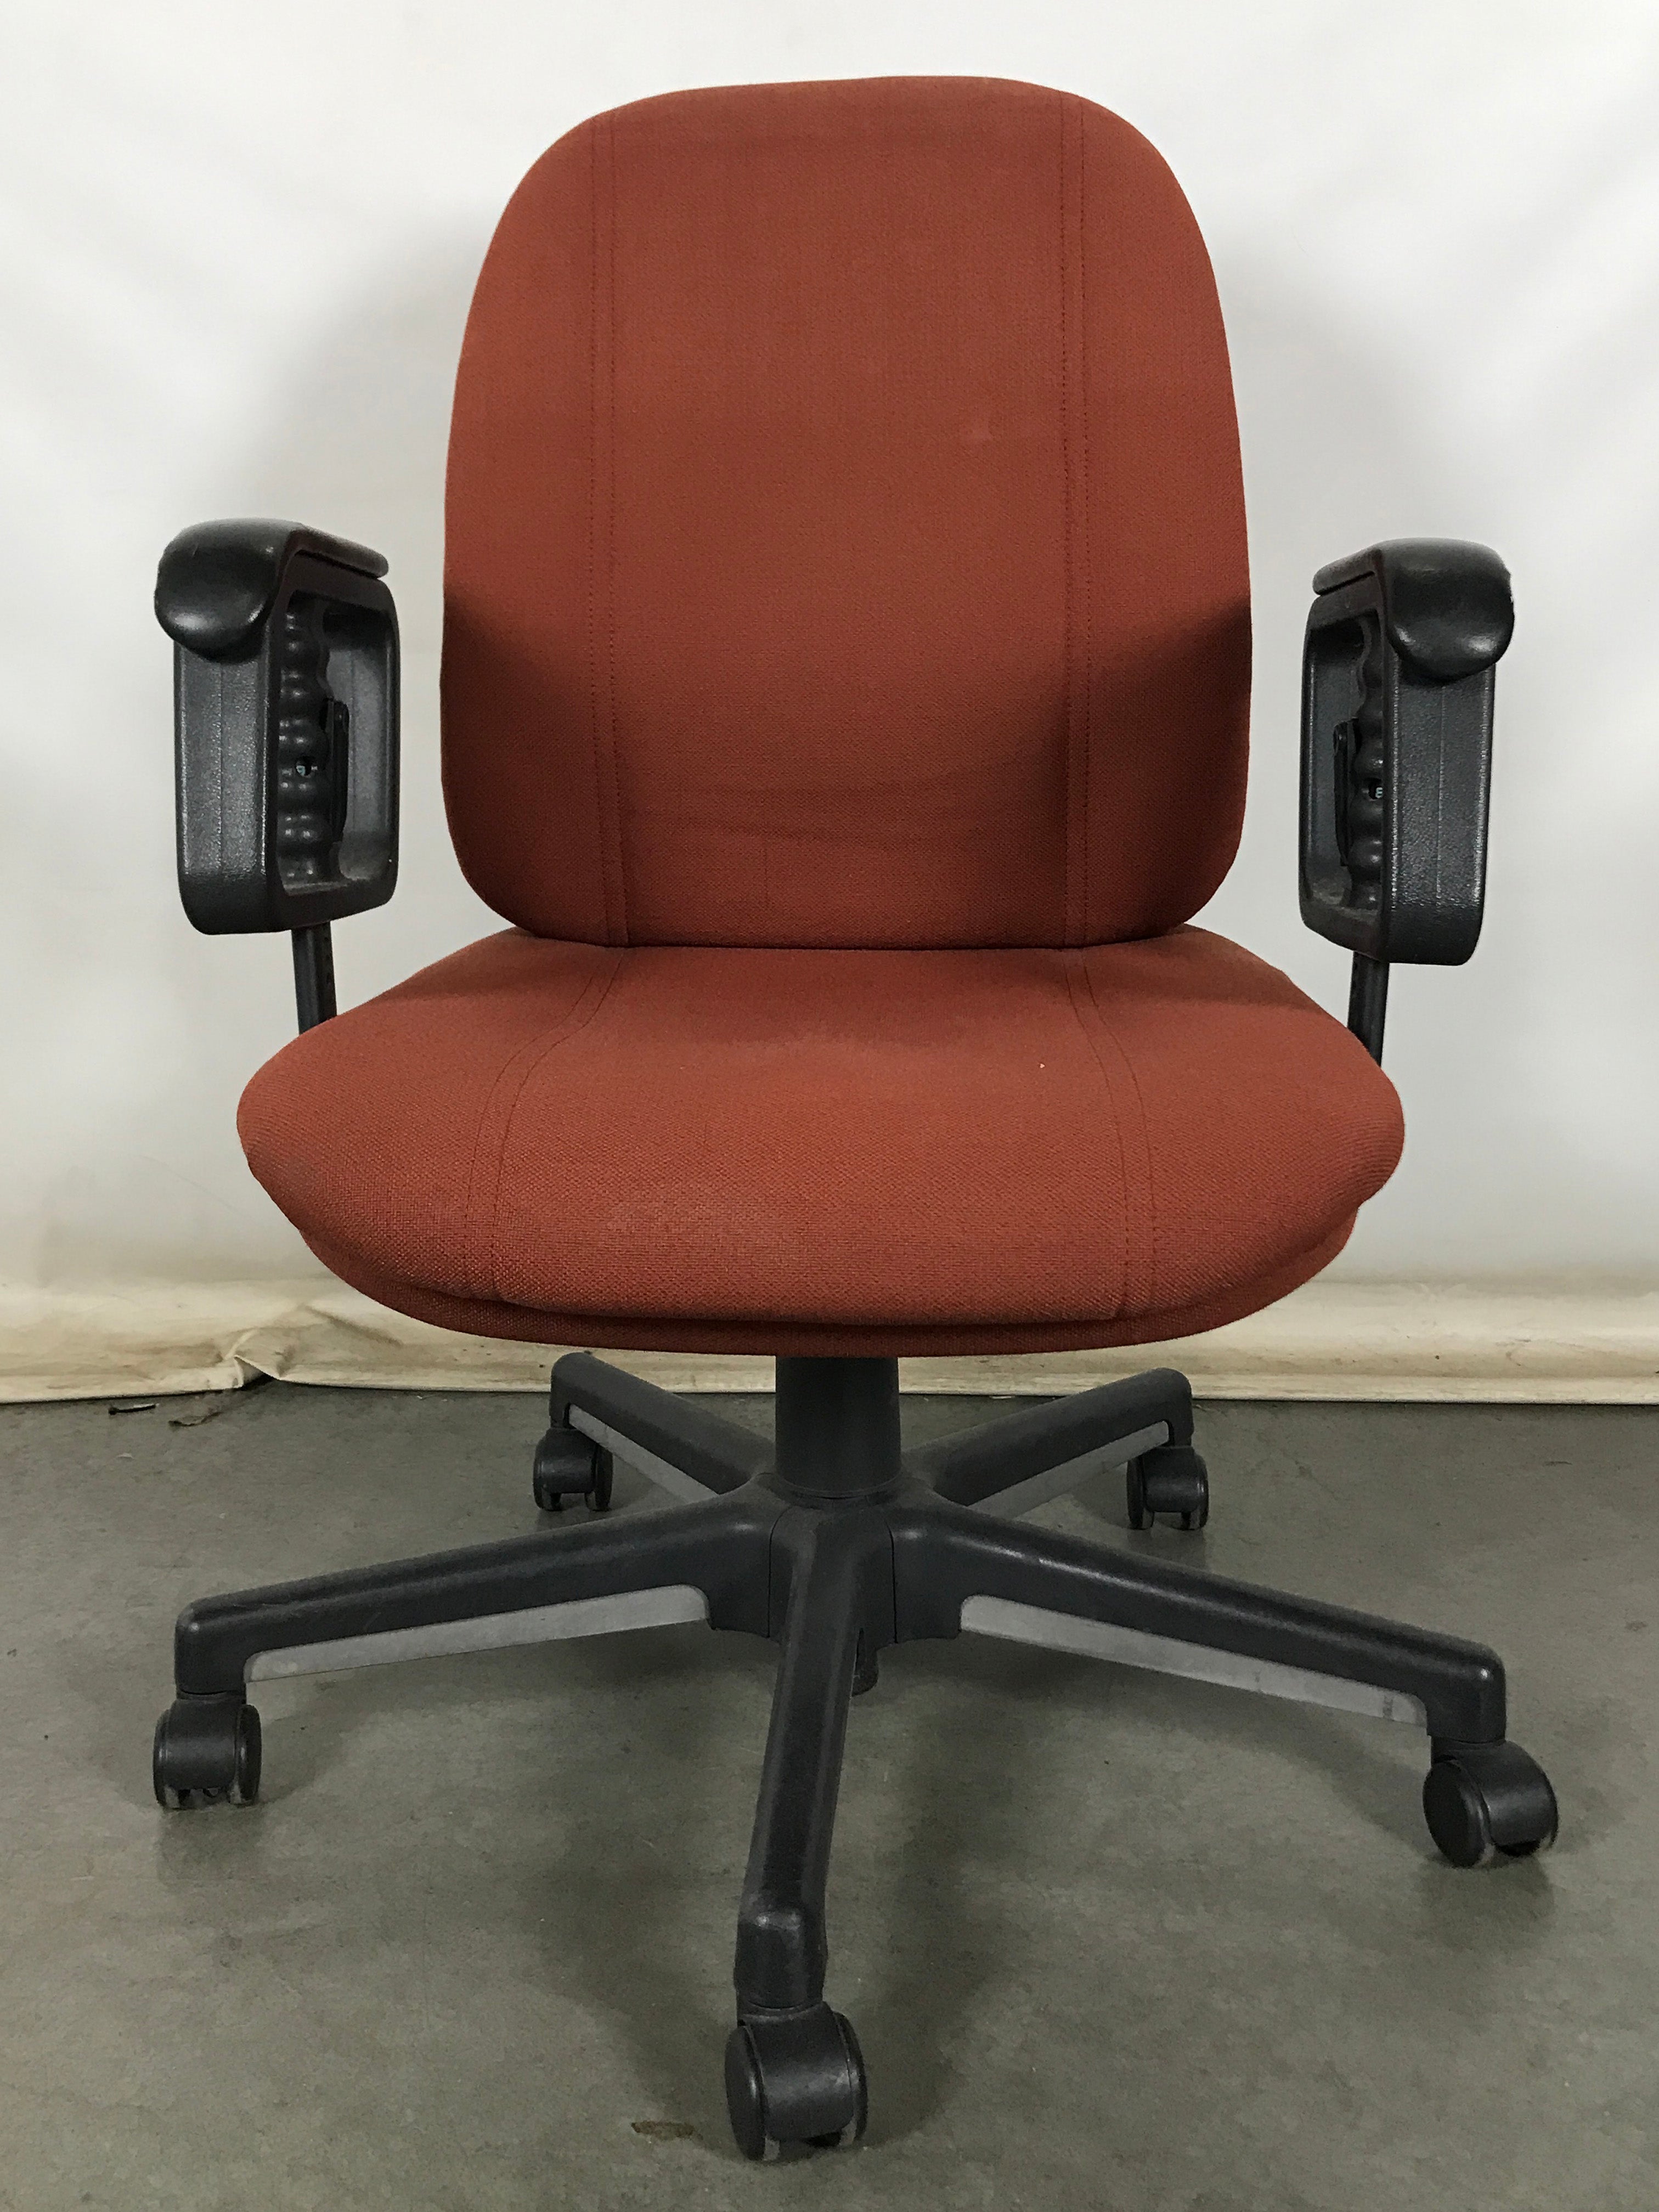 Grahl Adjustable Rolling Chair